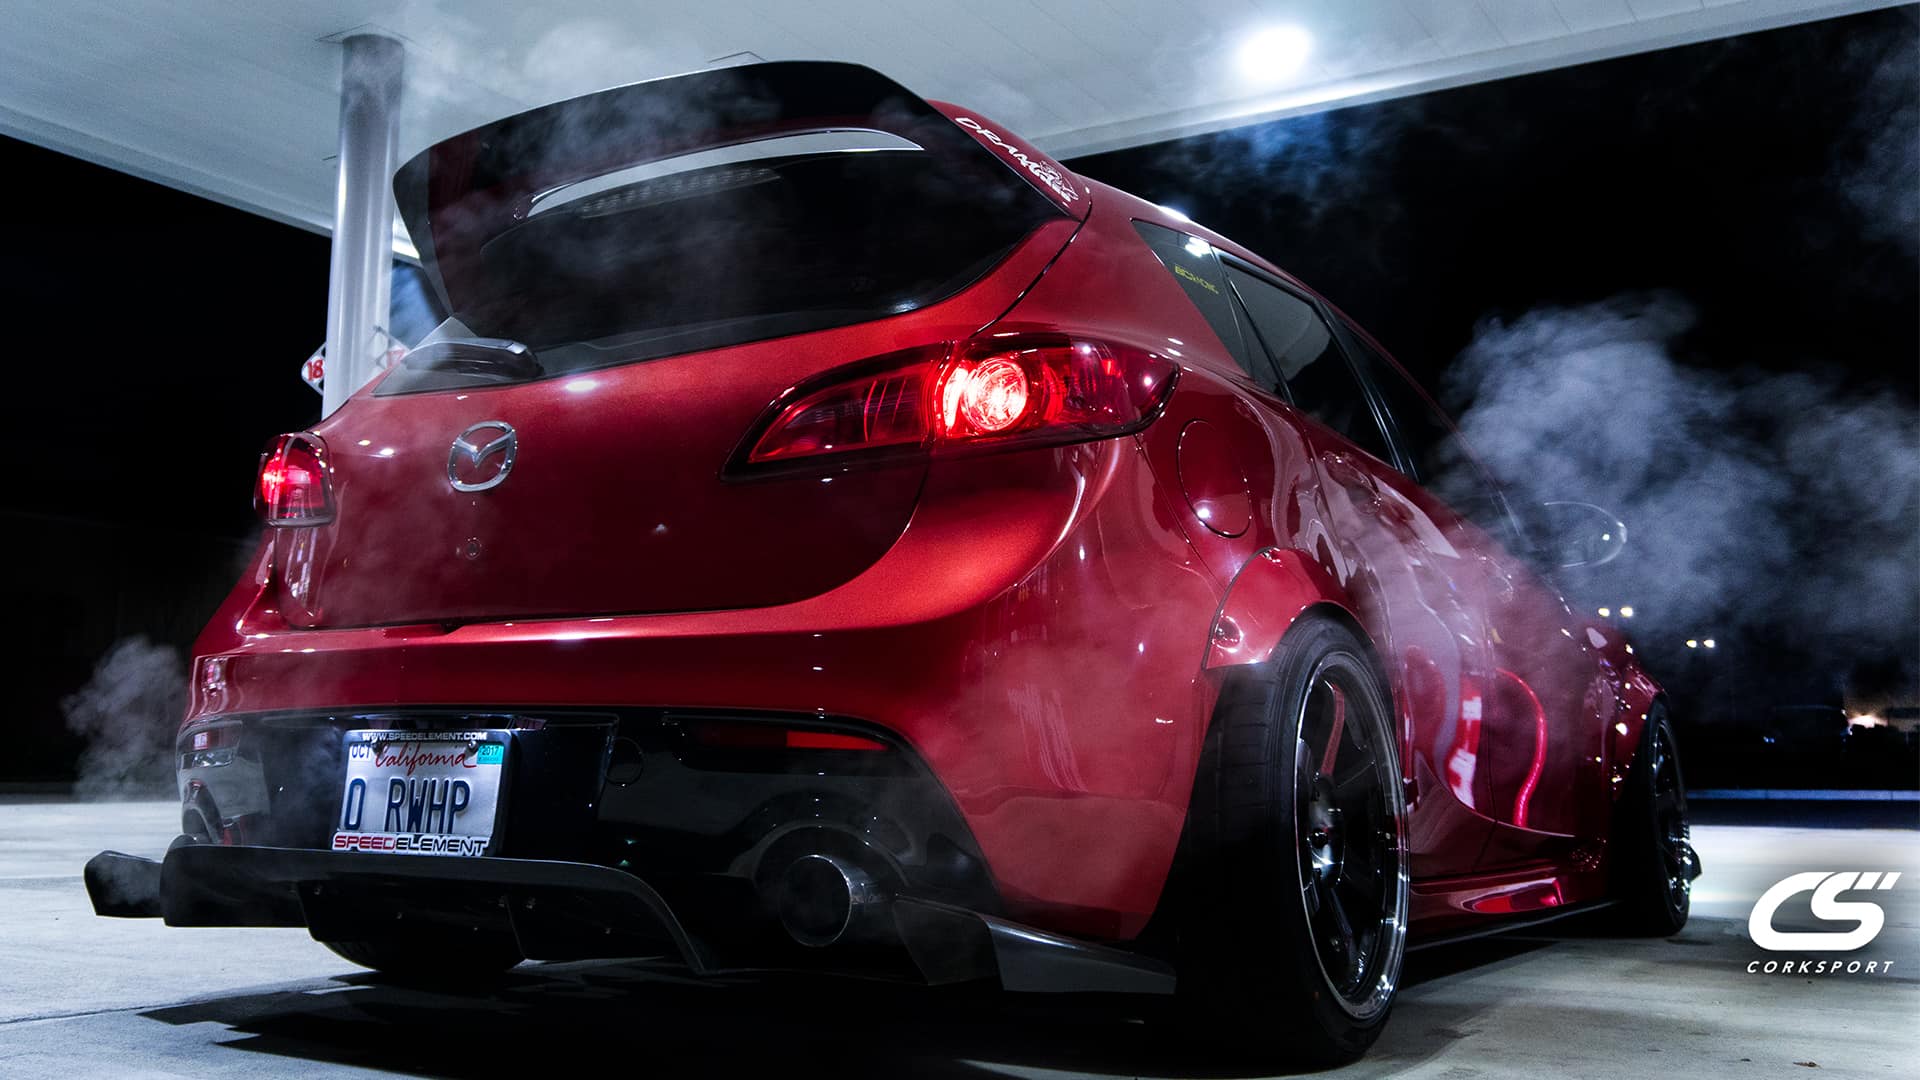 How to make 400 WHP in a Mazdaspeed 3